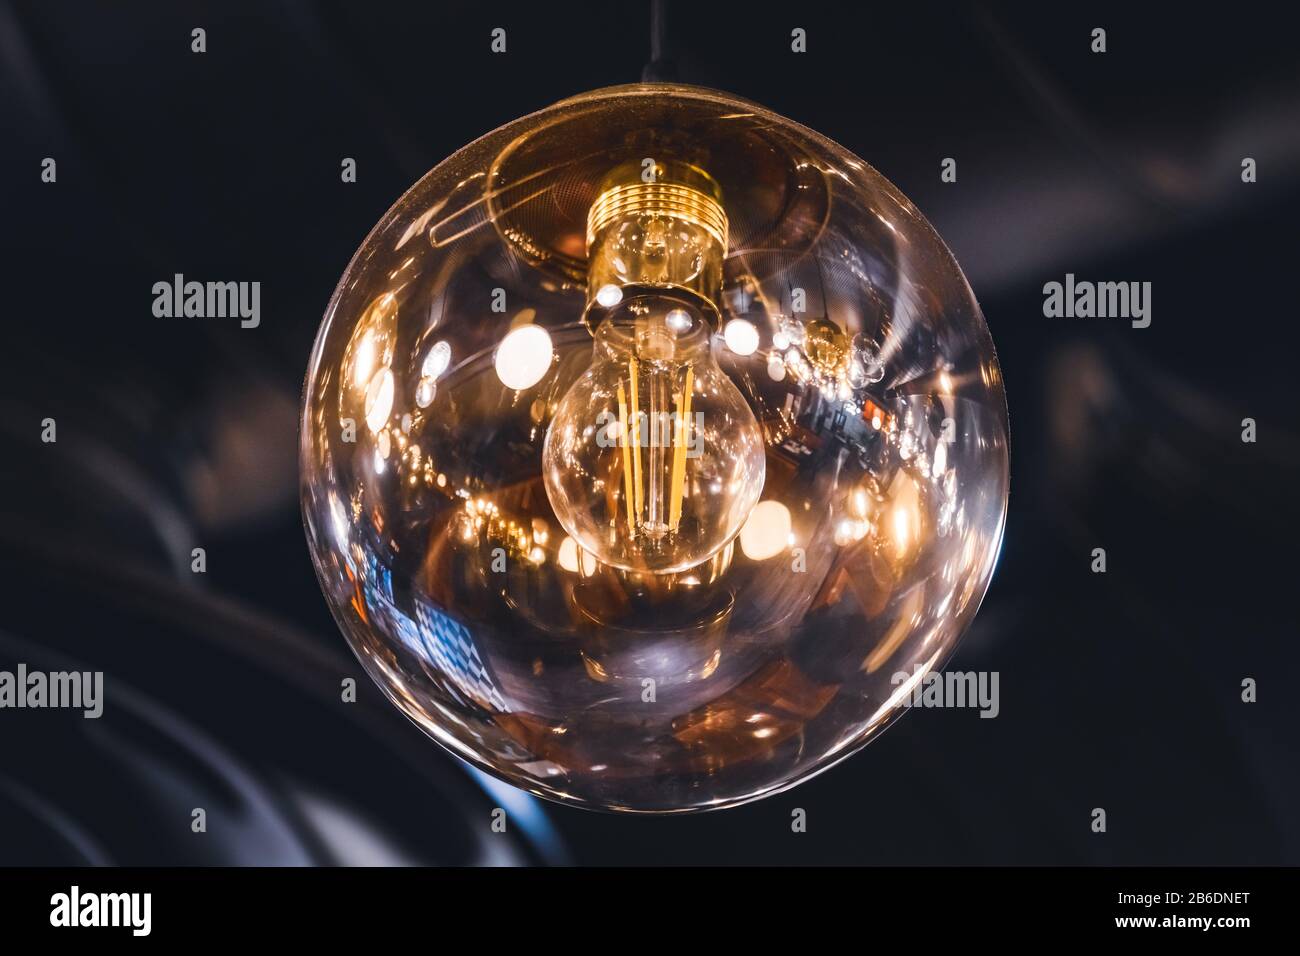 Giant vintage style light bulb with its retro filaments visible inside Stock Photo